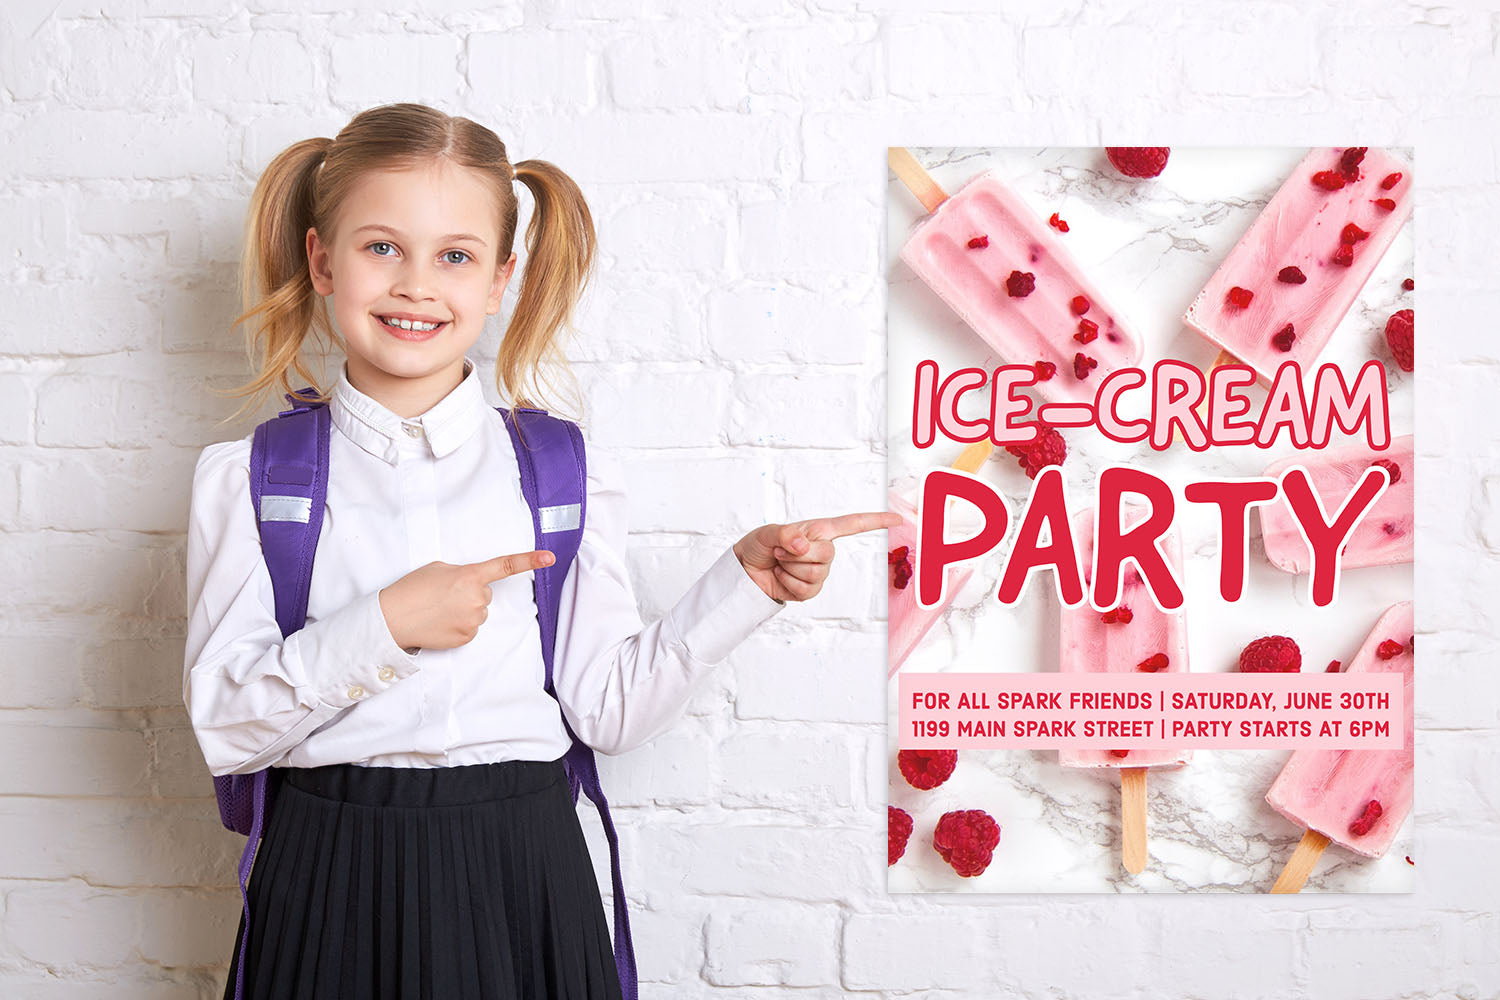 Ice Cream Party Poster Print Displayed by Little Girl